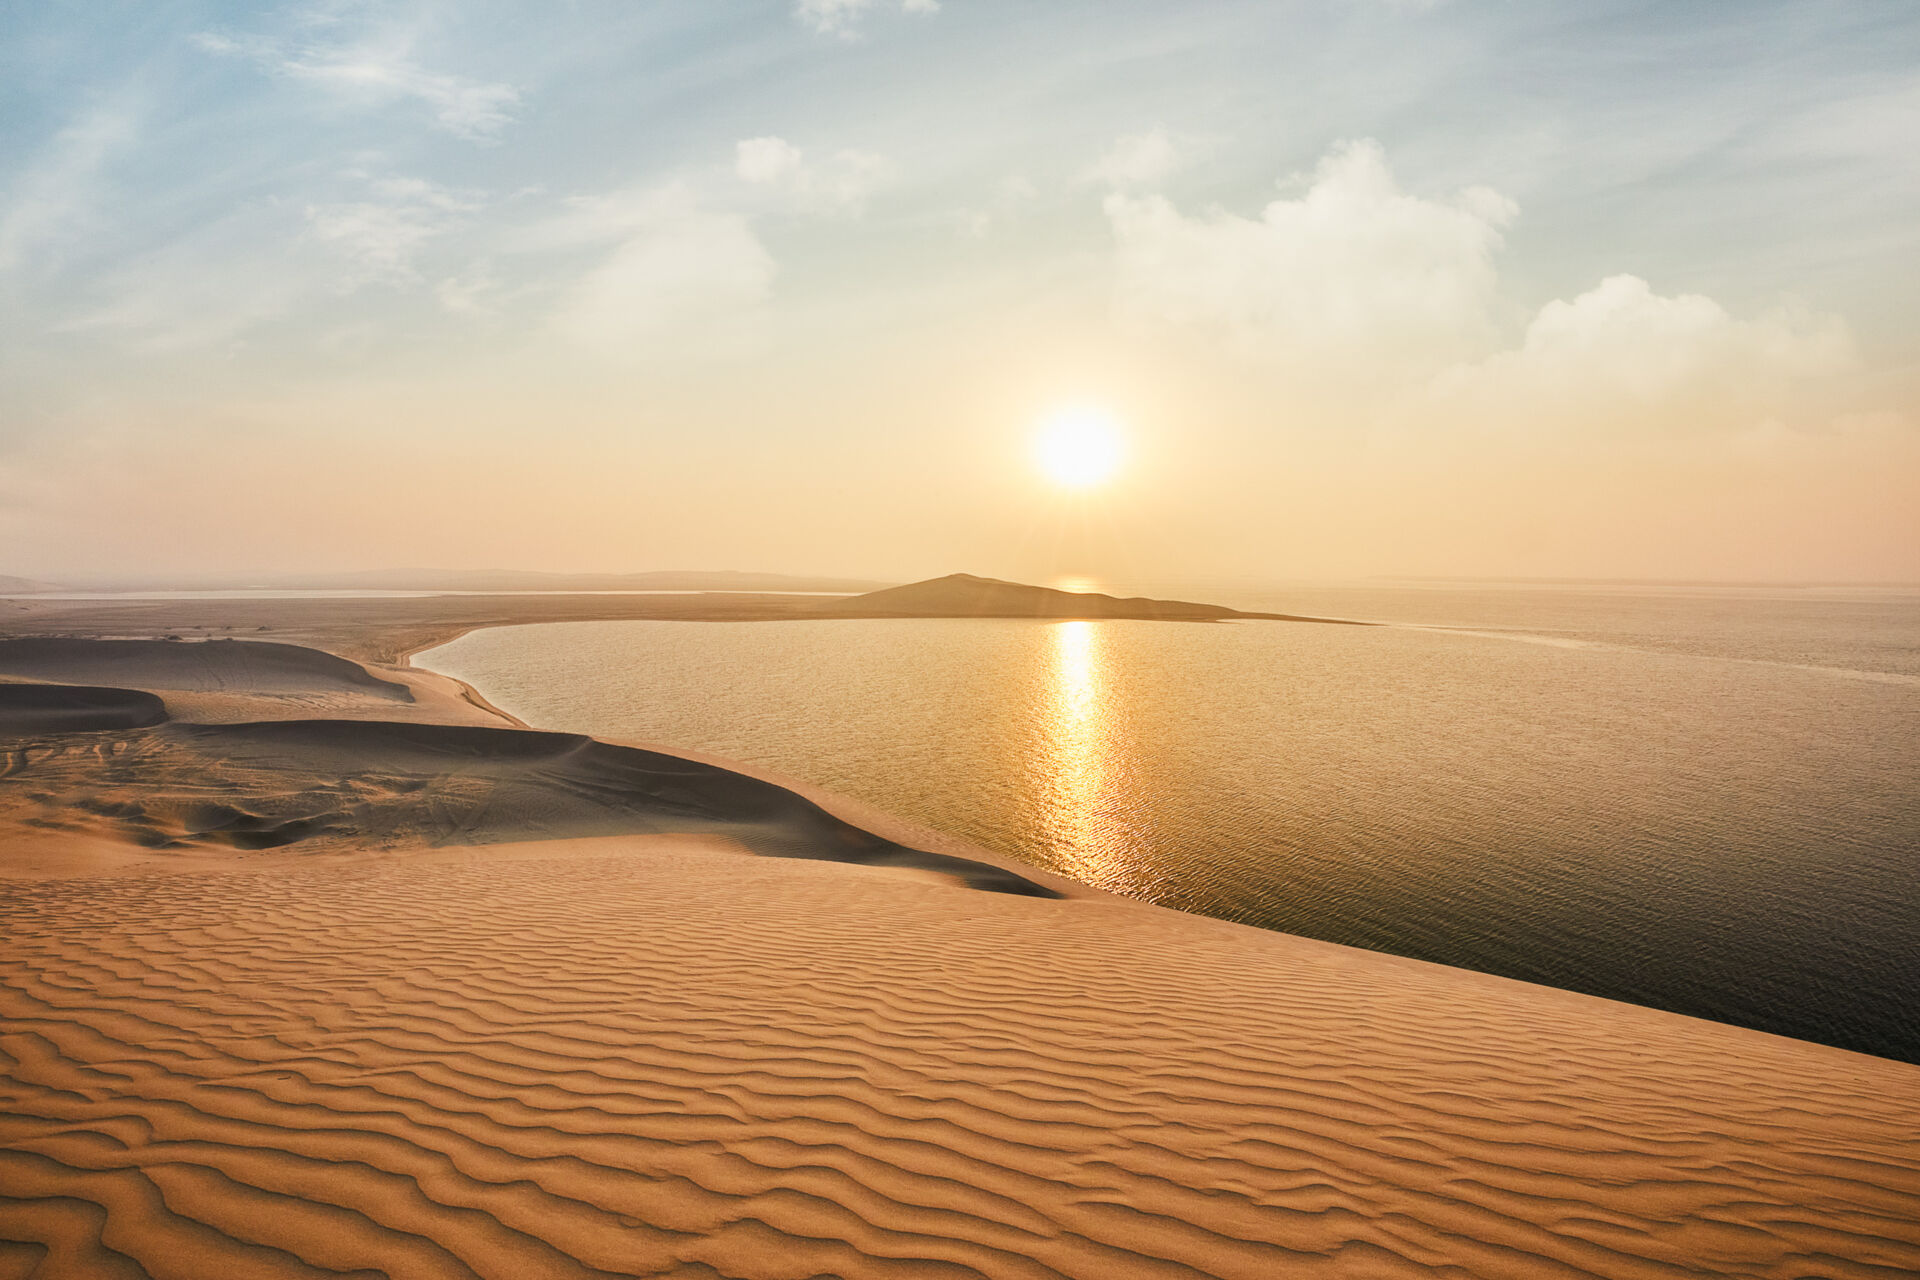 Sand dunes ripple down towards a calm body of water. The dunes curve around a natural bay. It's sunset. This is Khor Al-Adaid, or the Inland Sea.